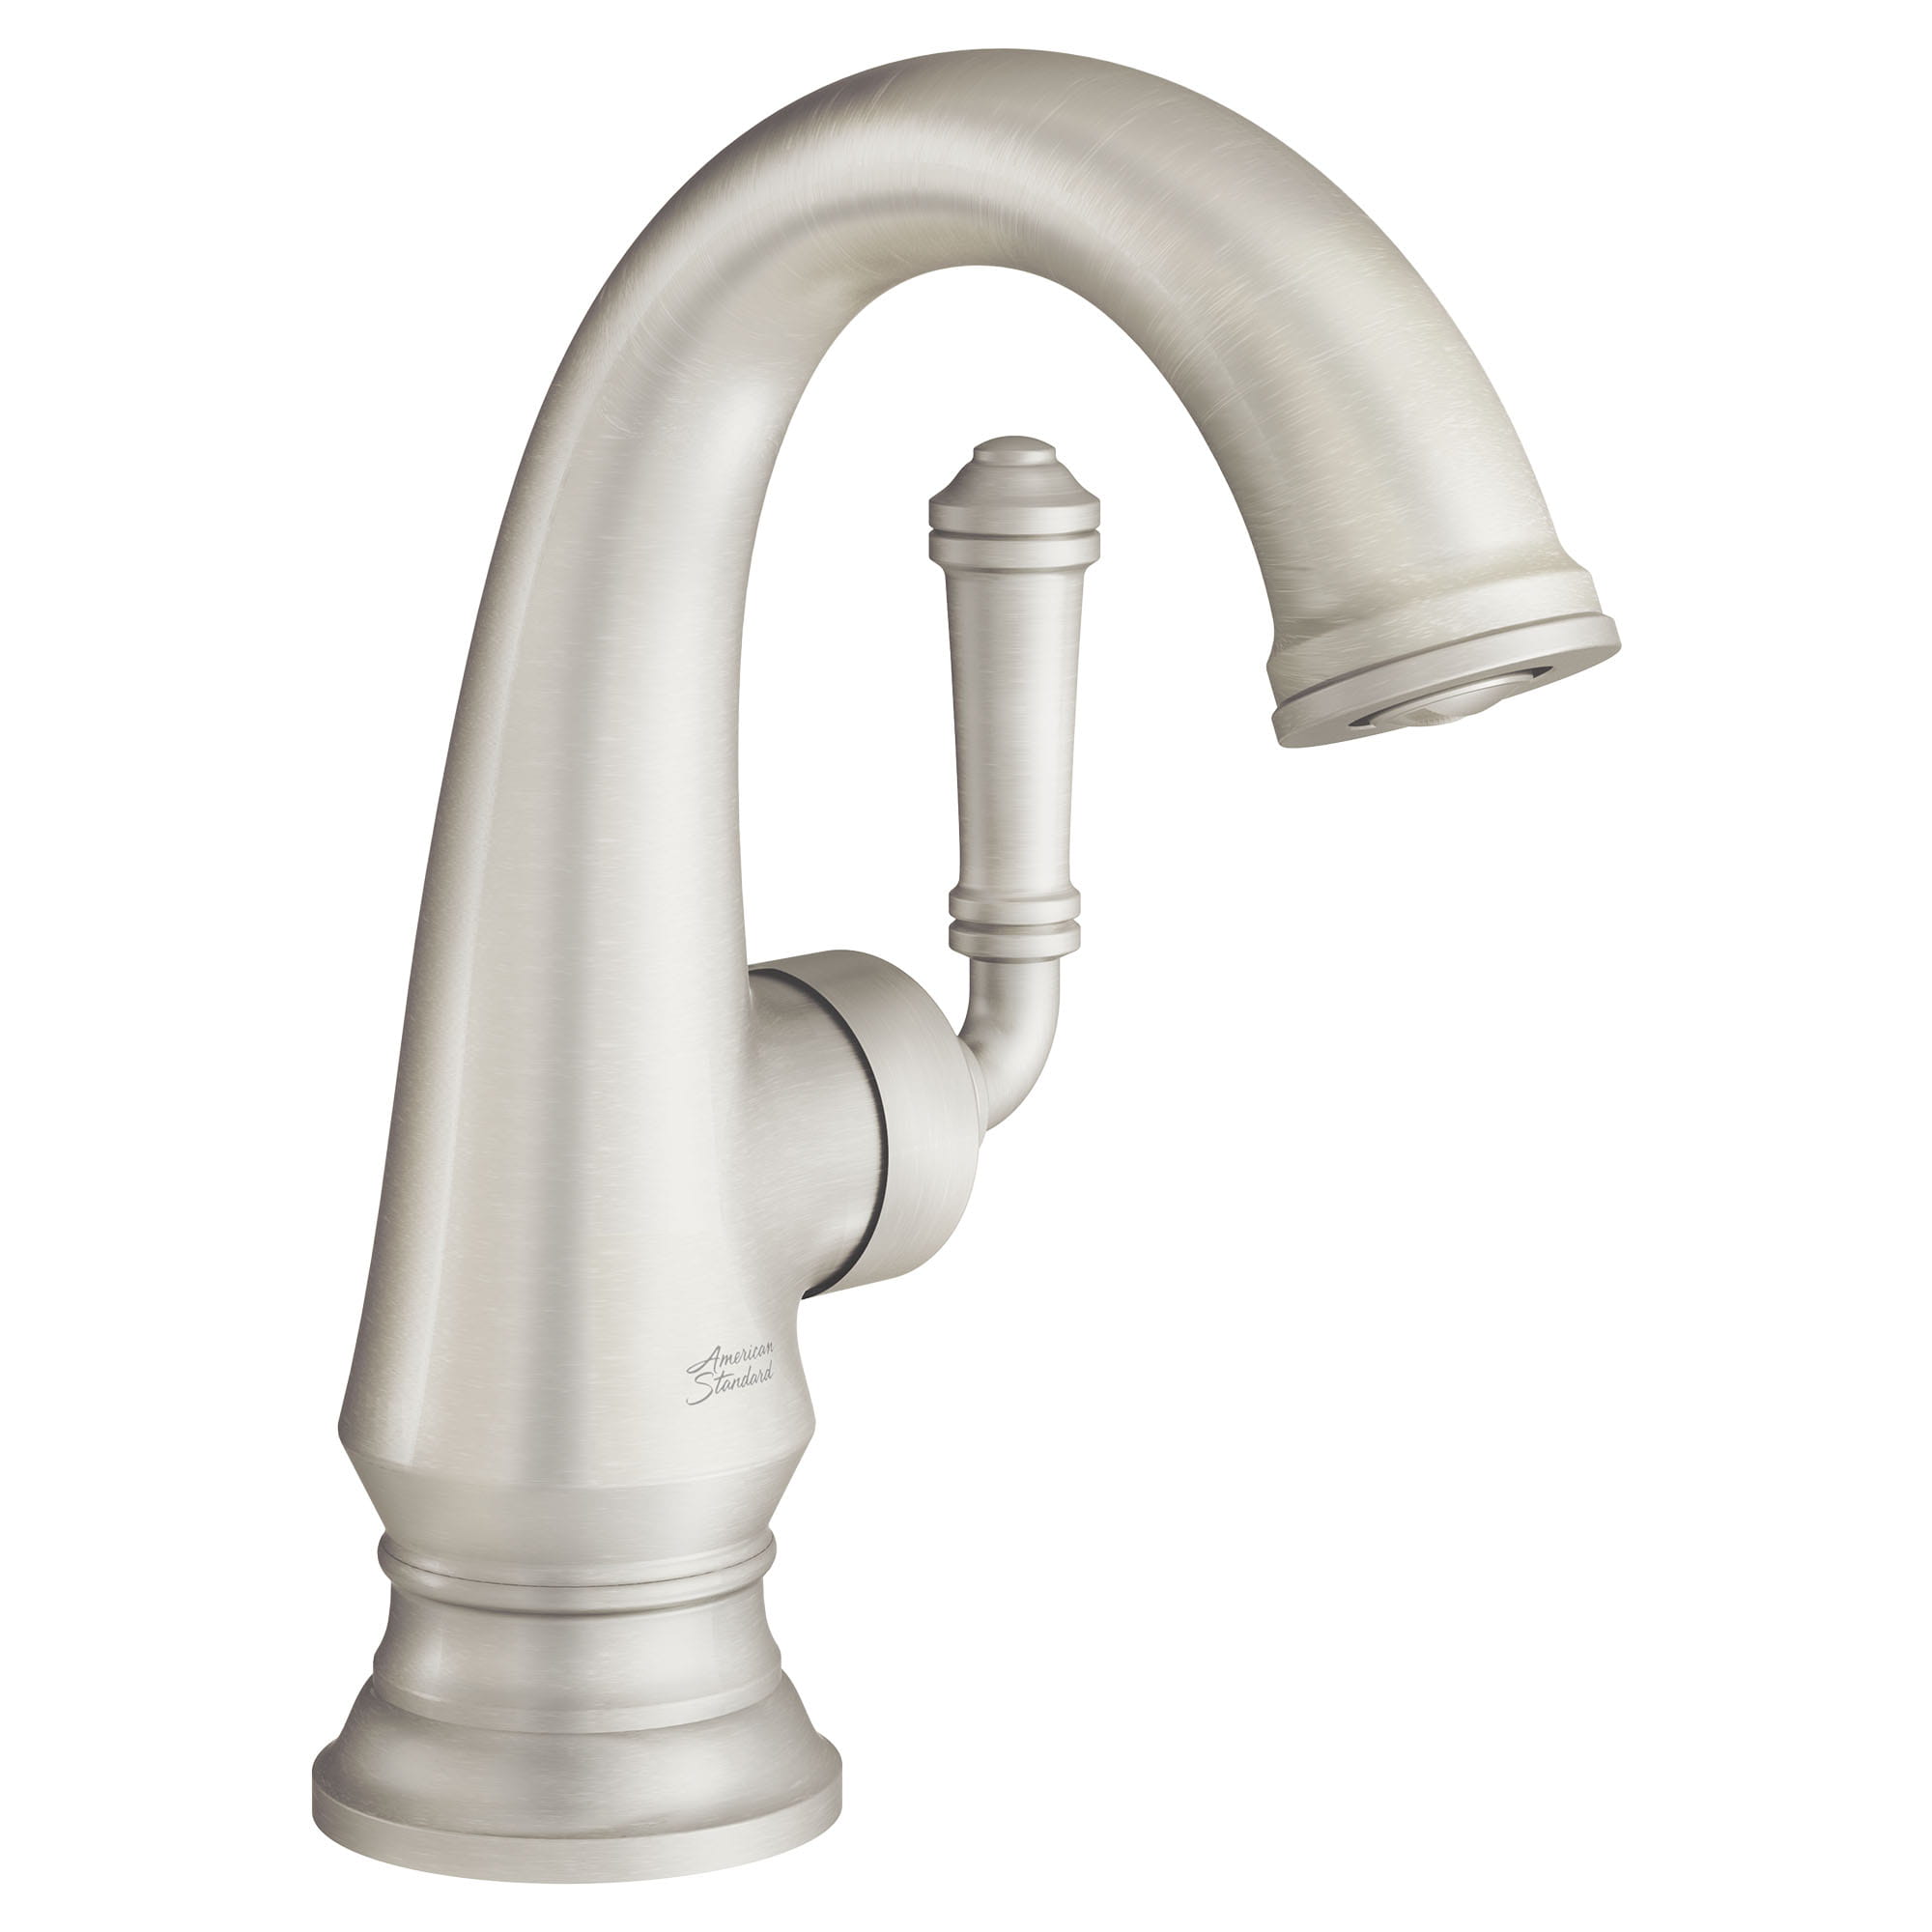 Delancey Single Hole Single Handle Bathroom Faucet 12 gpm 45 L min With Lever Handle BRUSHED NICKEL